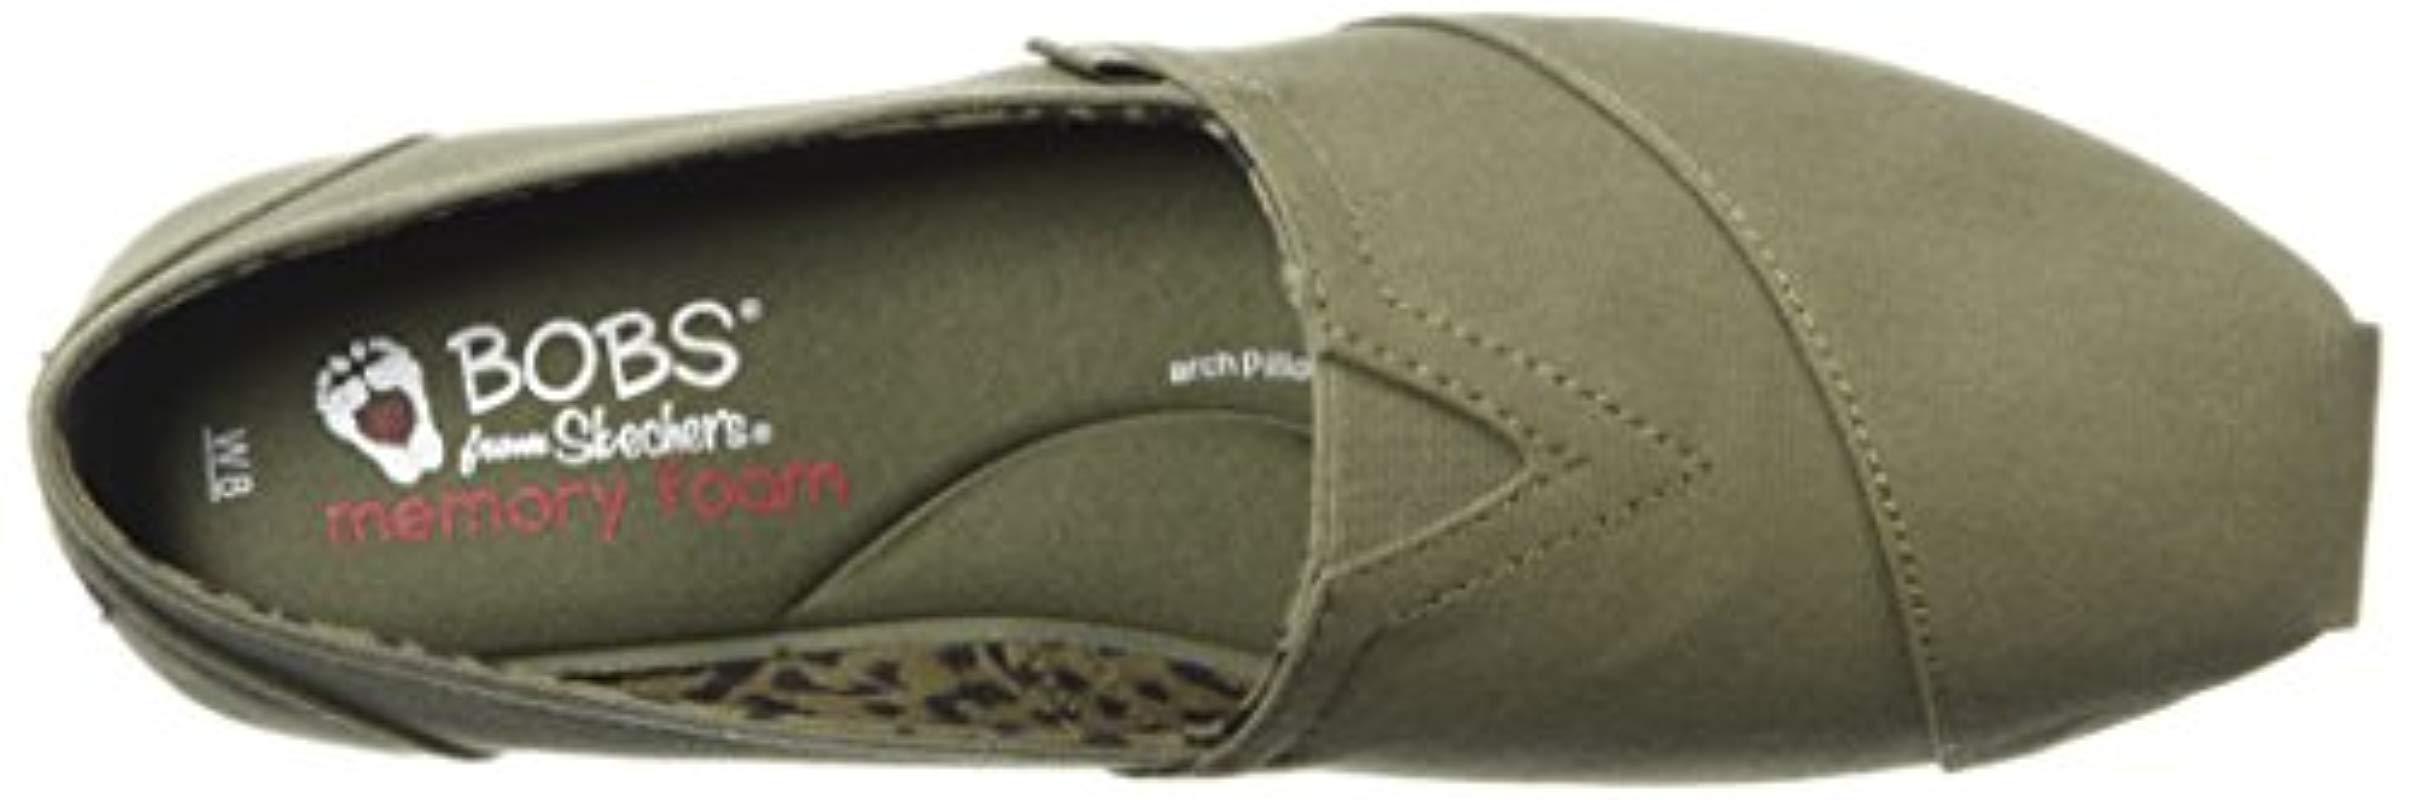 Skechers Bobs Bobs Plush-peace And Love Sneaker, Olive, 6.5 M Us in Green |  Lyst